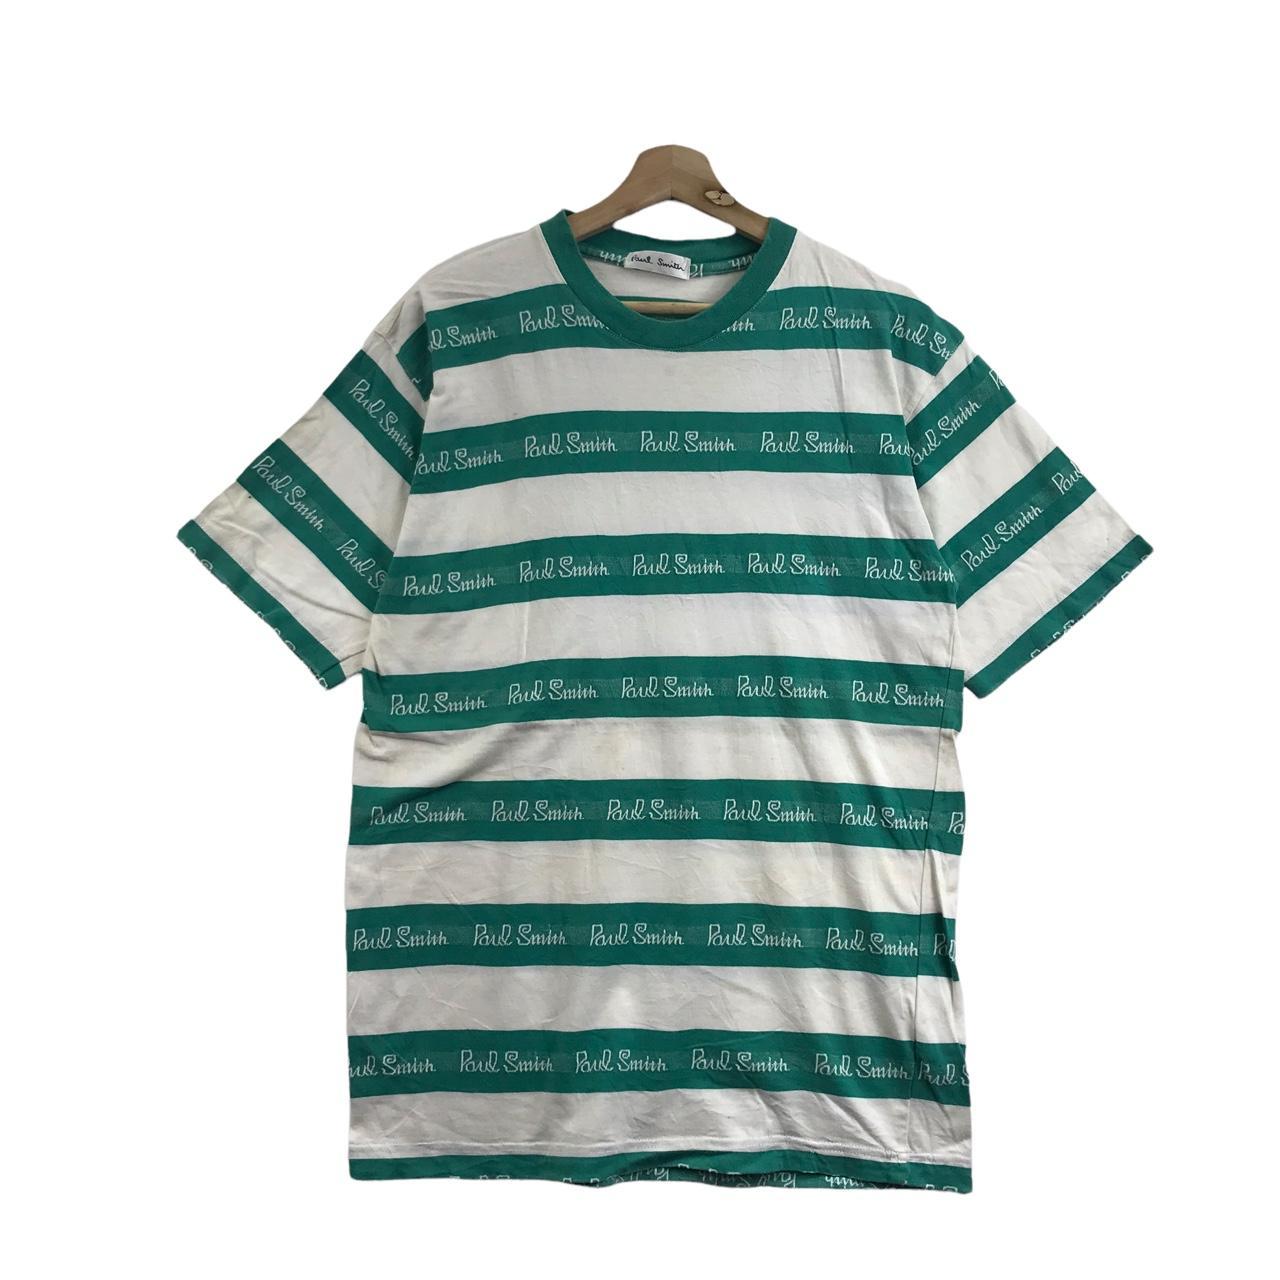 Paul Smith Men's Green and White T-shirt | Depop